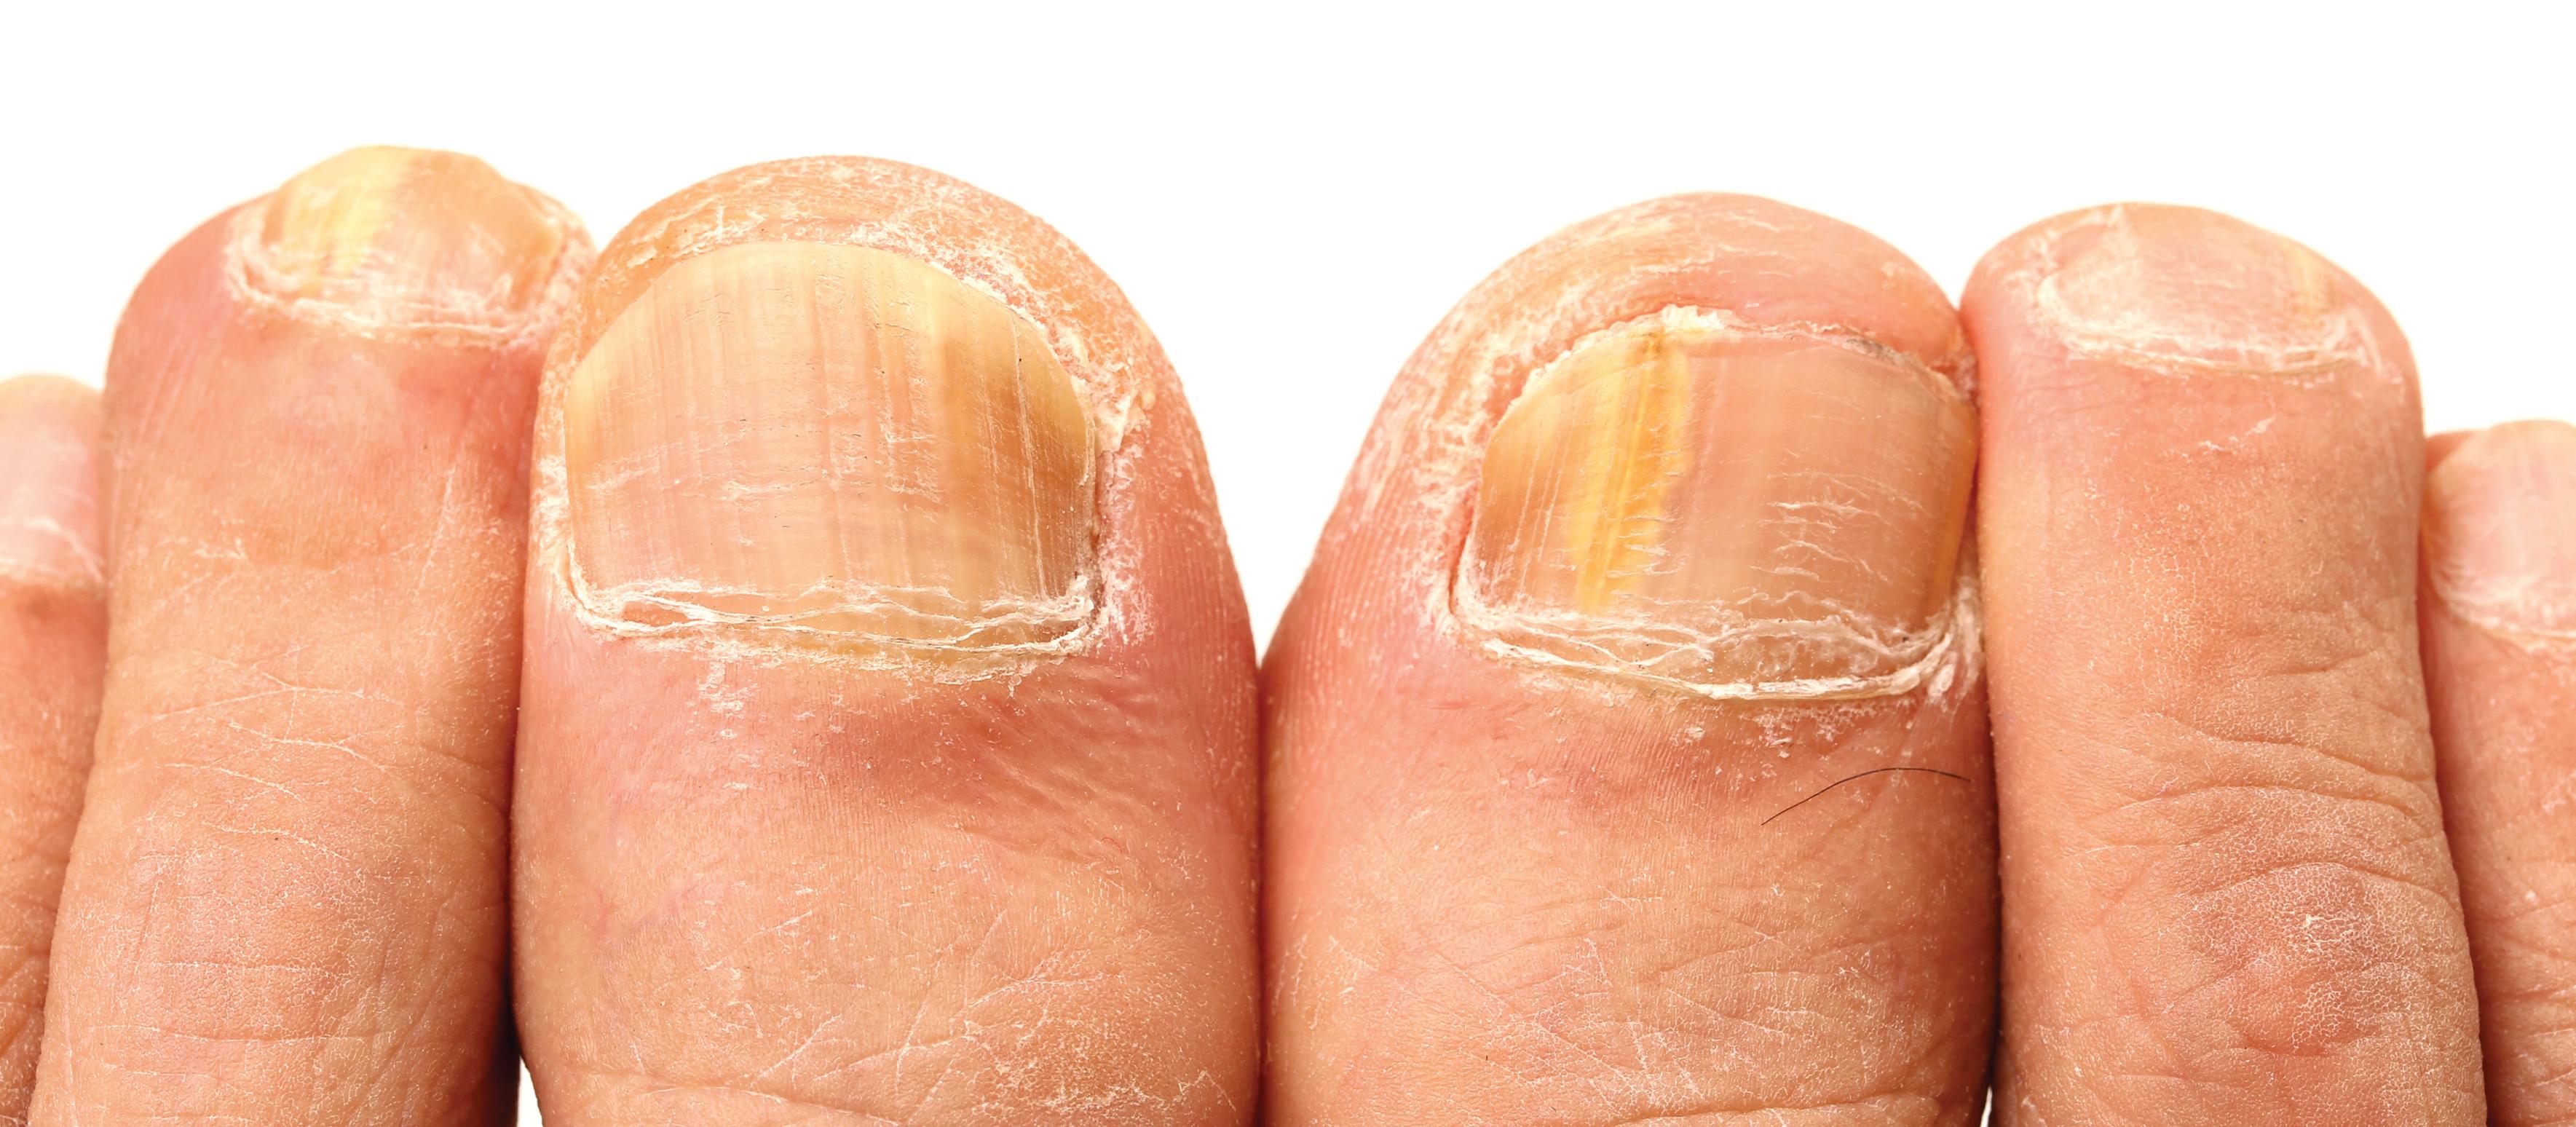 Psoriatic nails: Relieve the patient - Gehwol Footcare